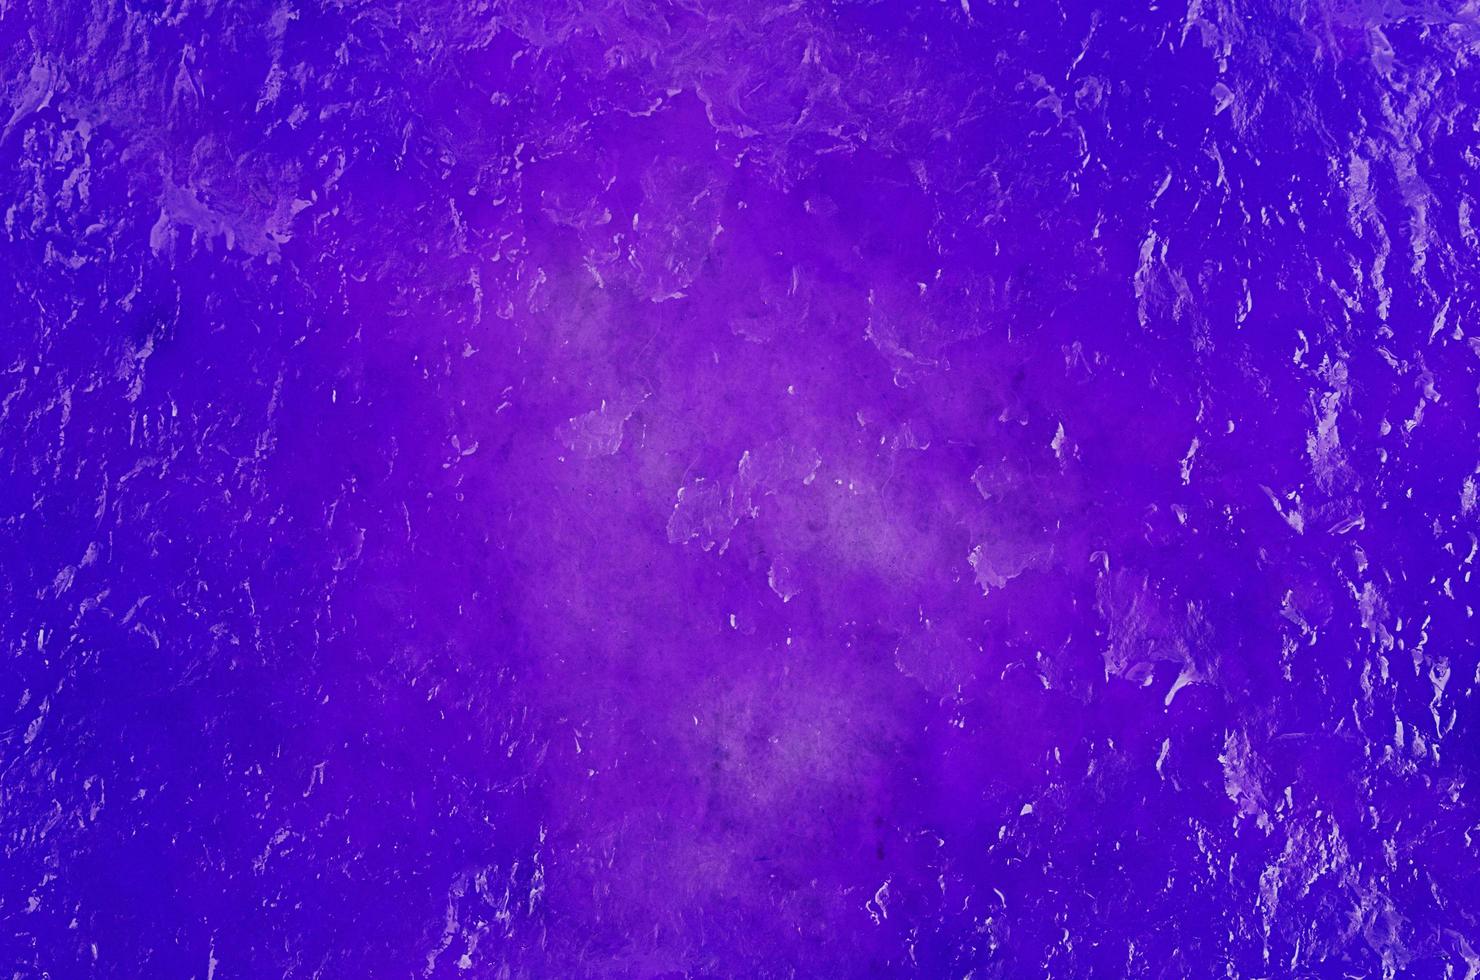 Purple color abstract background with dried mango textures photo